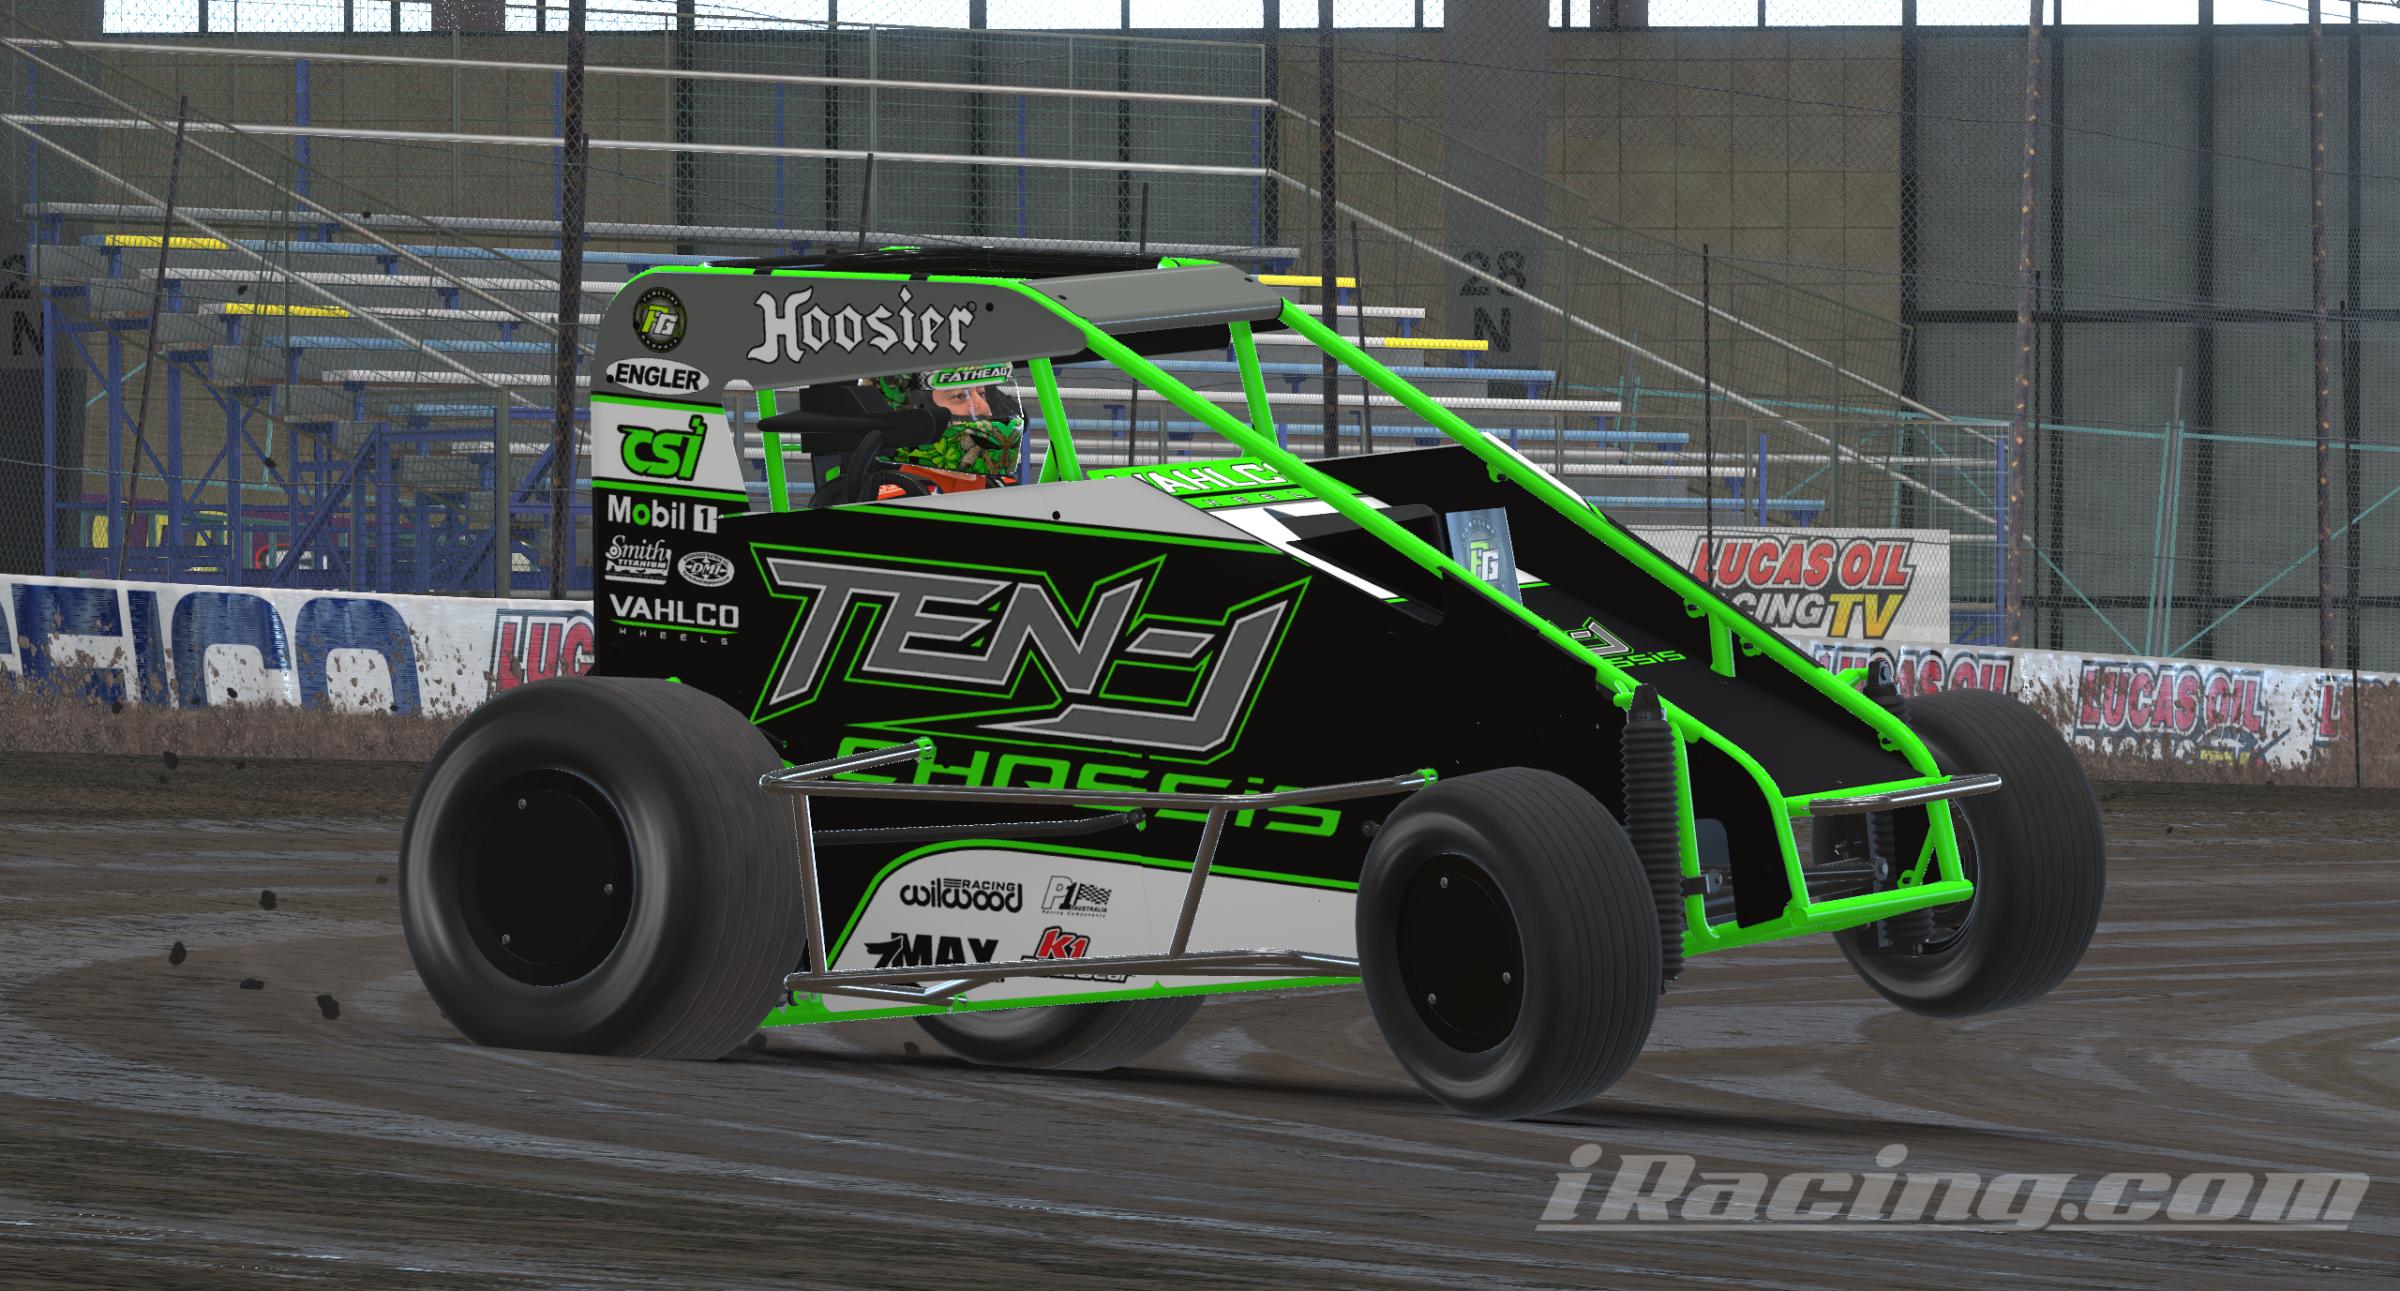 Preview of Ten J Chassis Concept by Jake Boyer